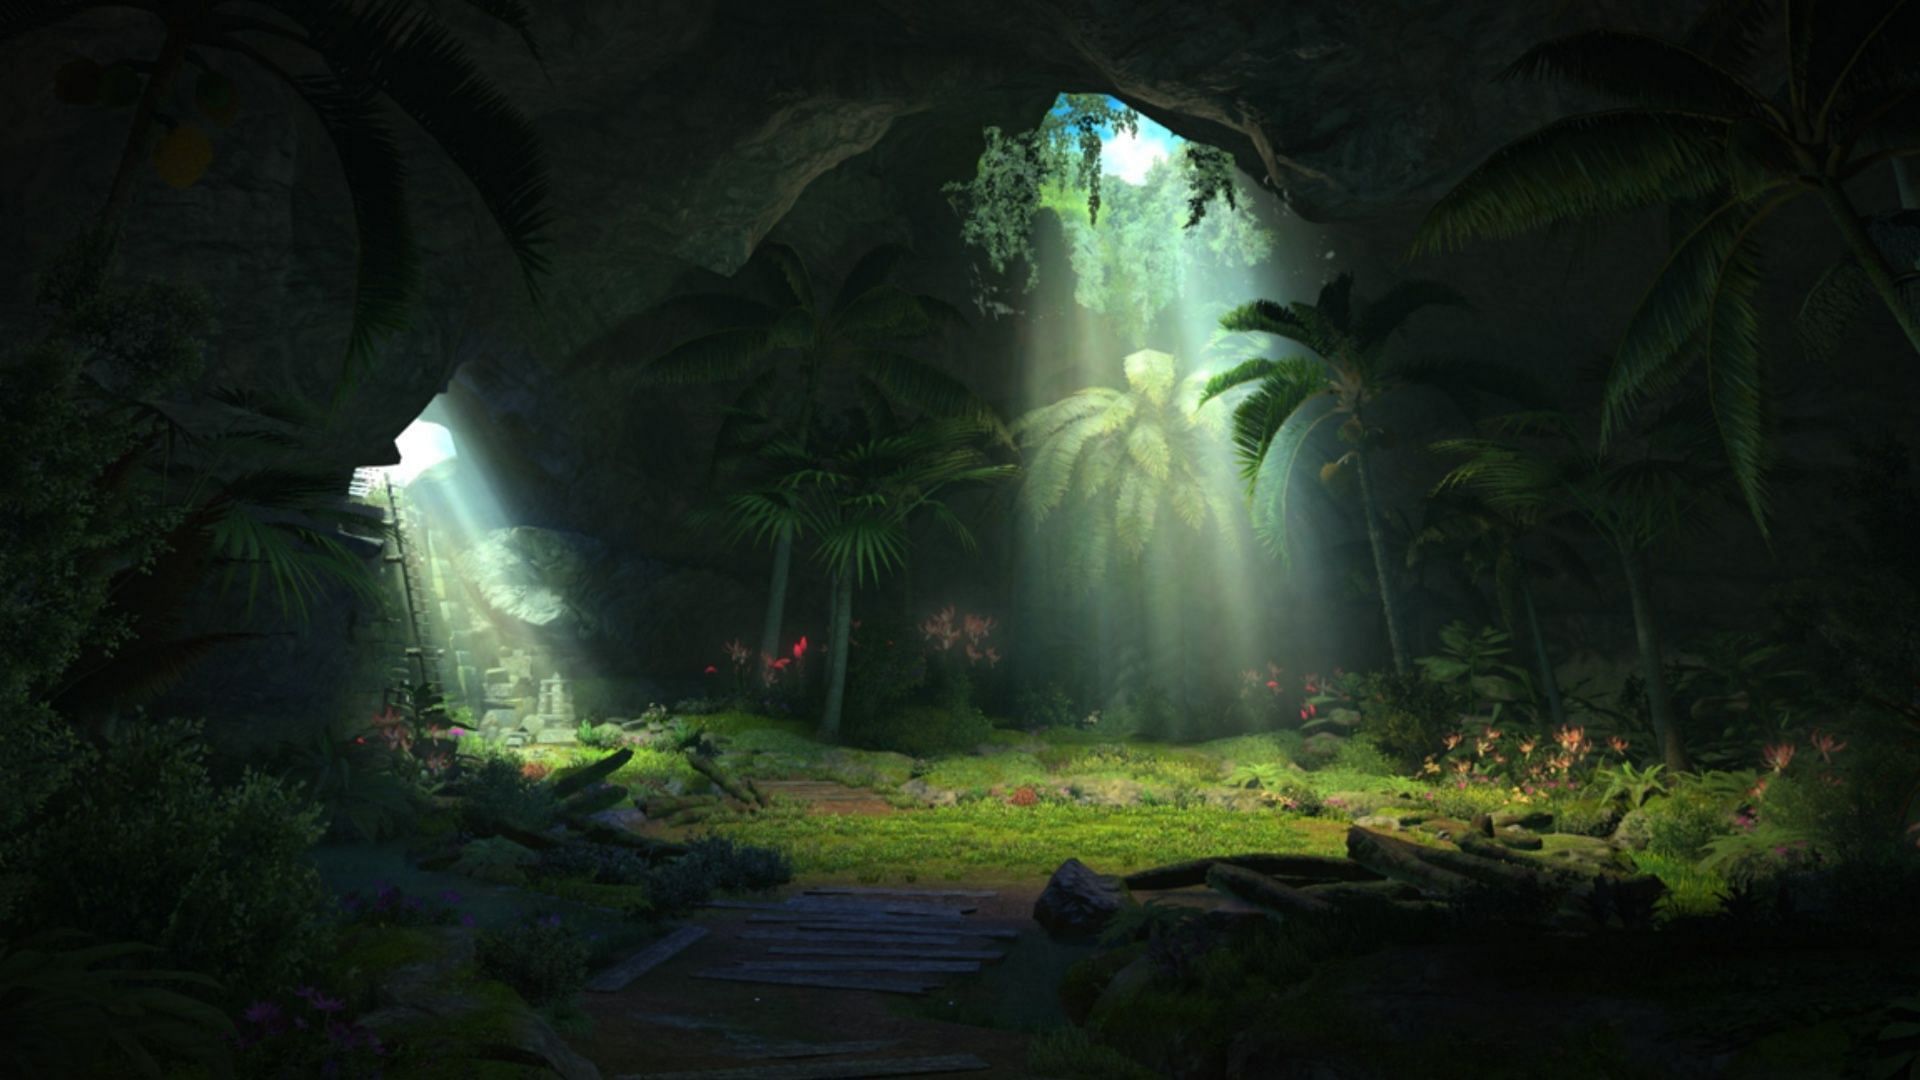 Xbox players will be able to explore dungeons like this in the expansion (Image via Square Enix)